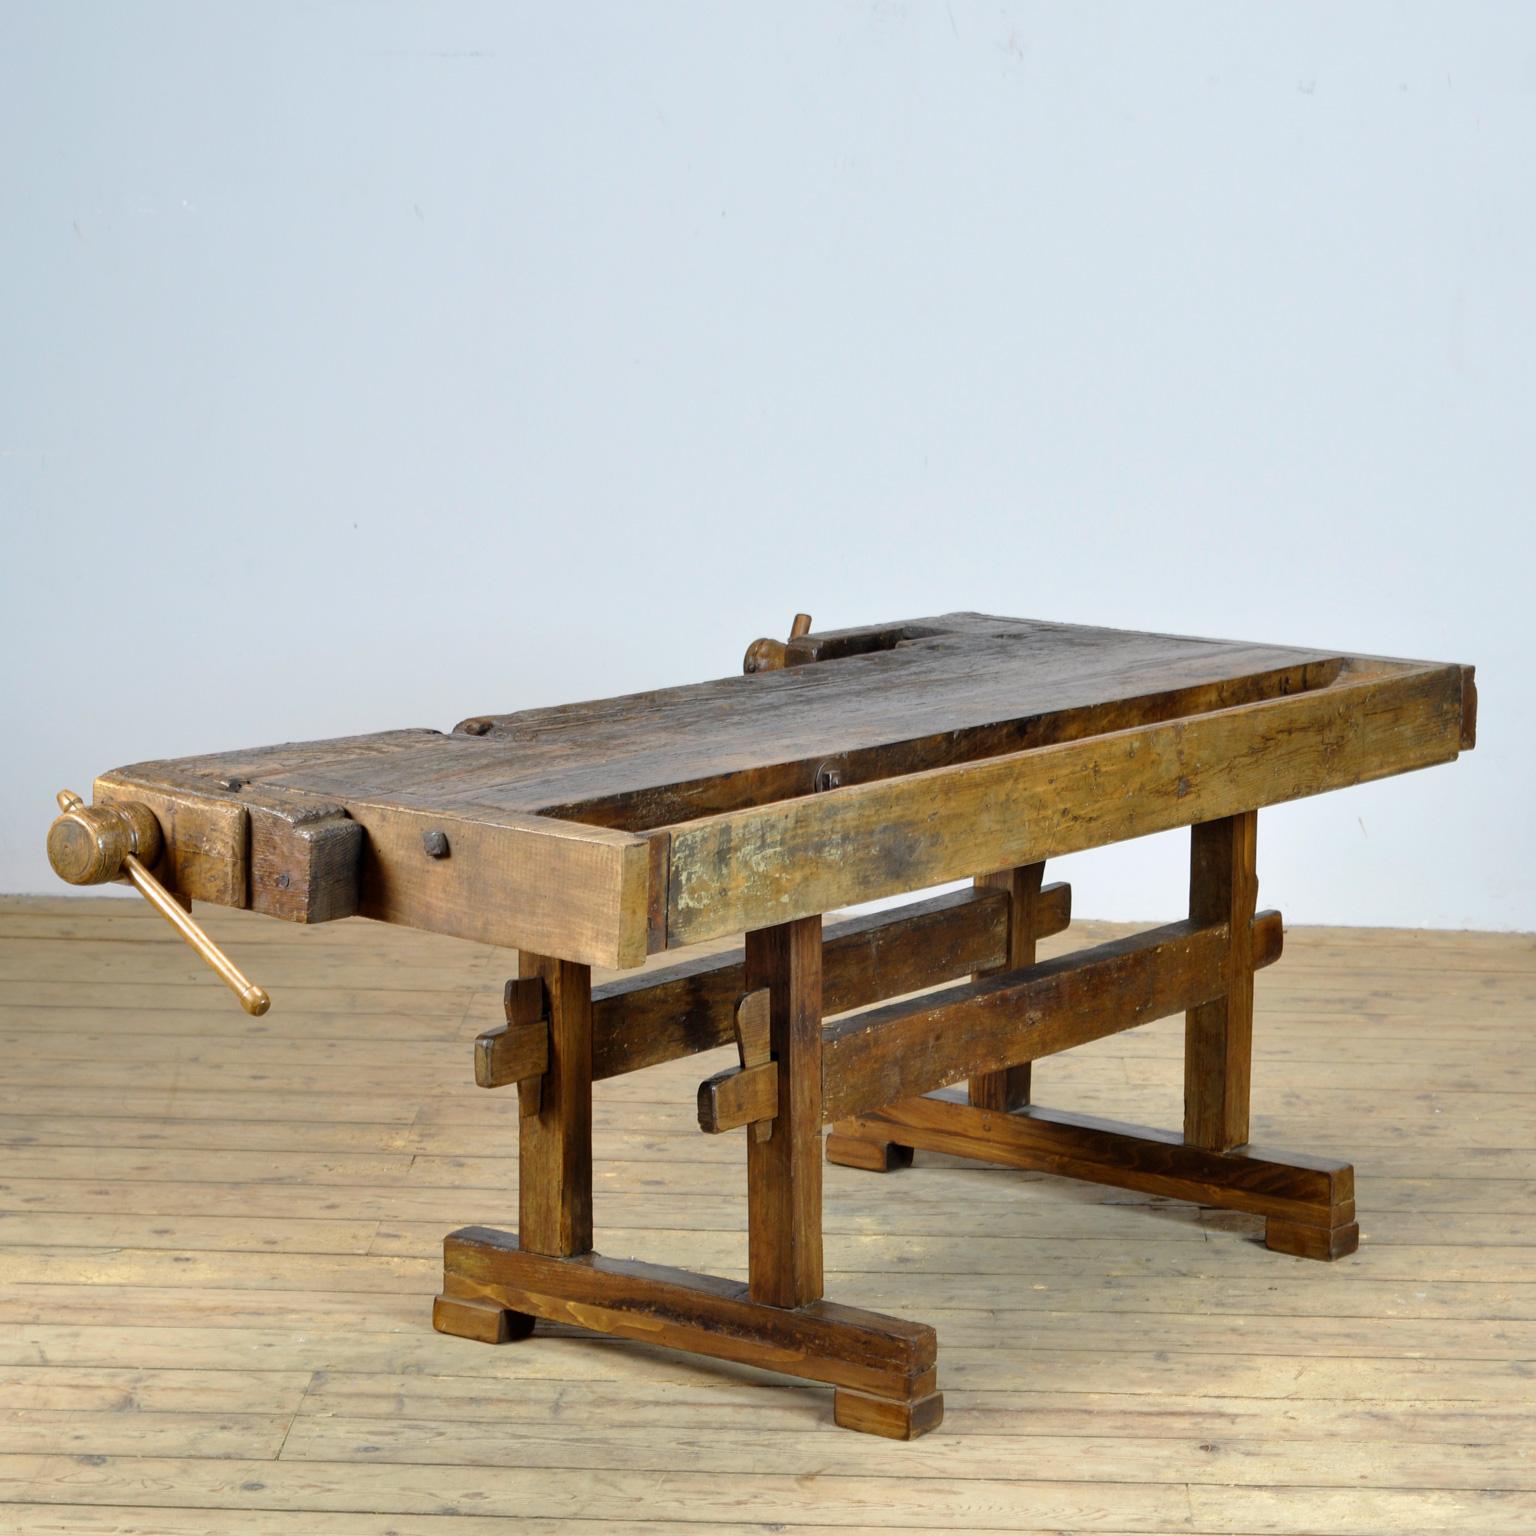 This antique workbench has two built-in wooden vices screws and a recessed tray where the carpenter would put his tools. It was manufactured around 1910. Made from oak. Beautiful patina after years of use. The workbench has been treated for